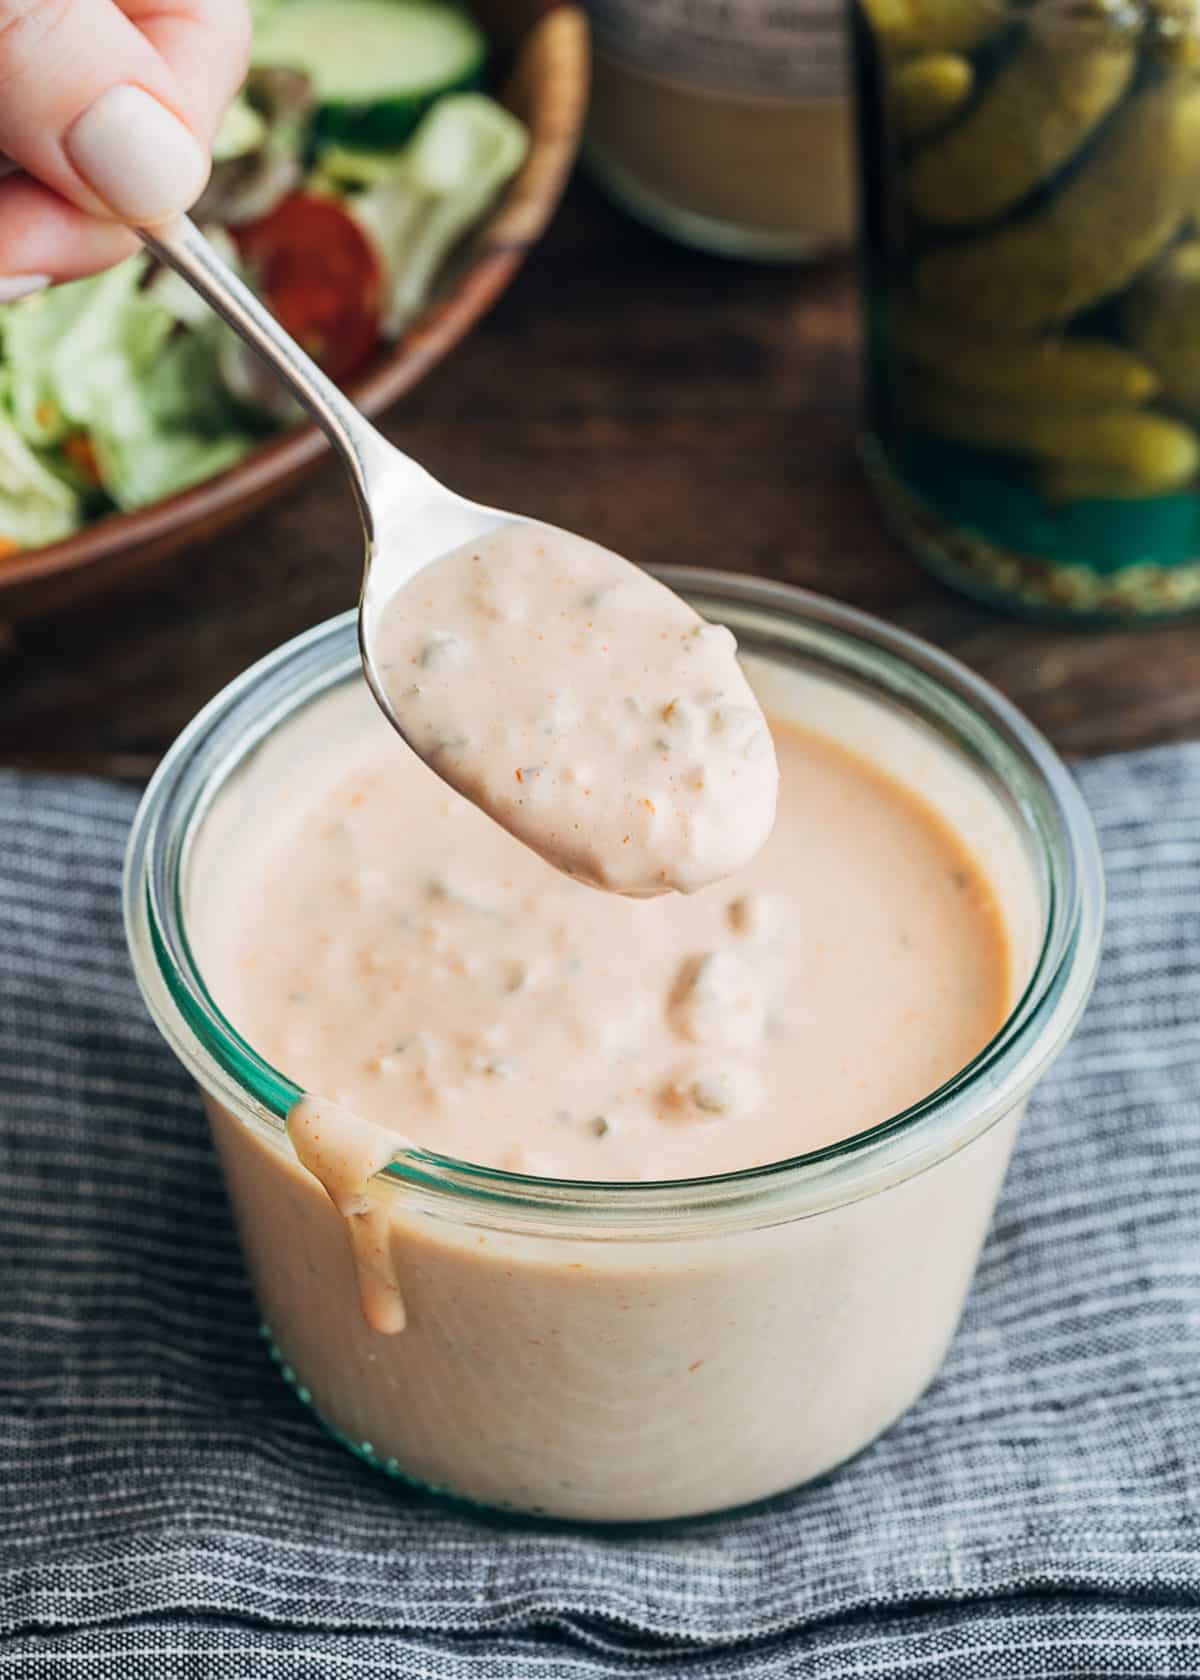 a spoonful of Russian dressing being taken from a glass jar